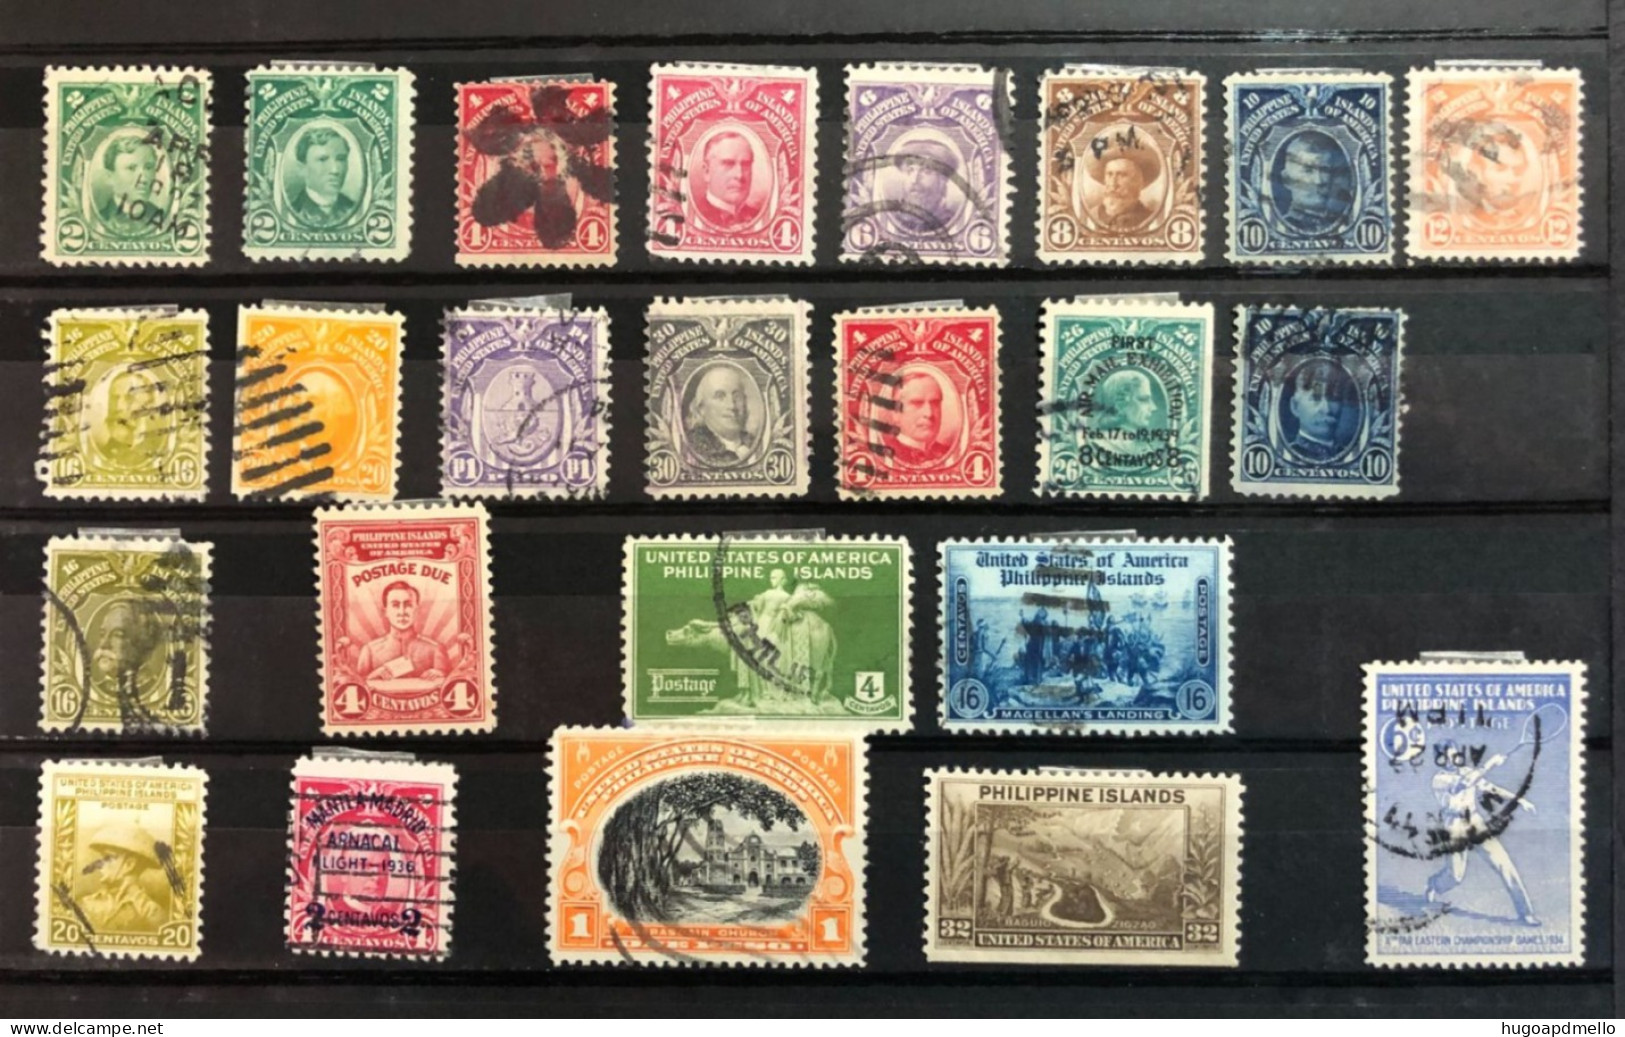 PHILIPPINES Islands (United States Possession), Lot Composed Of 24 Old Stamps. *MH And USED - Philippinen